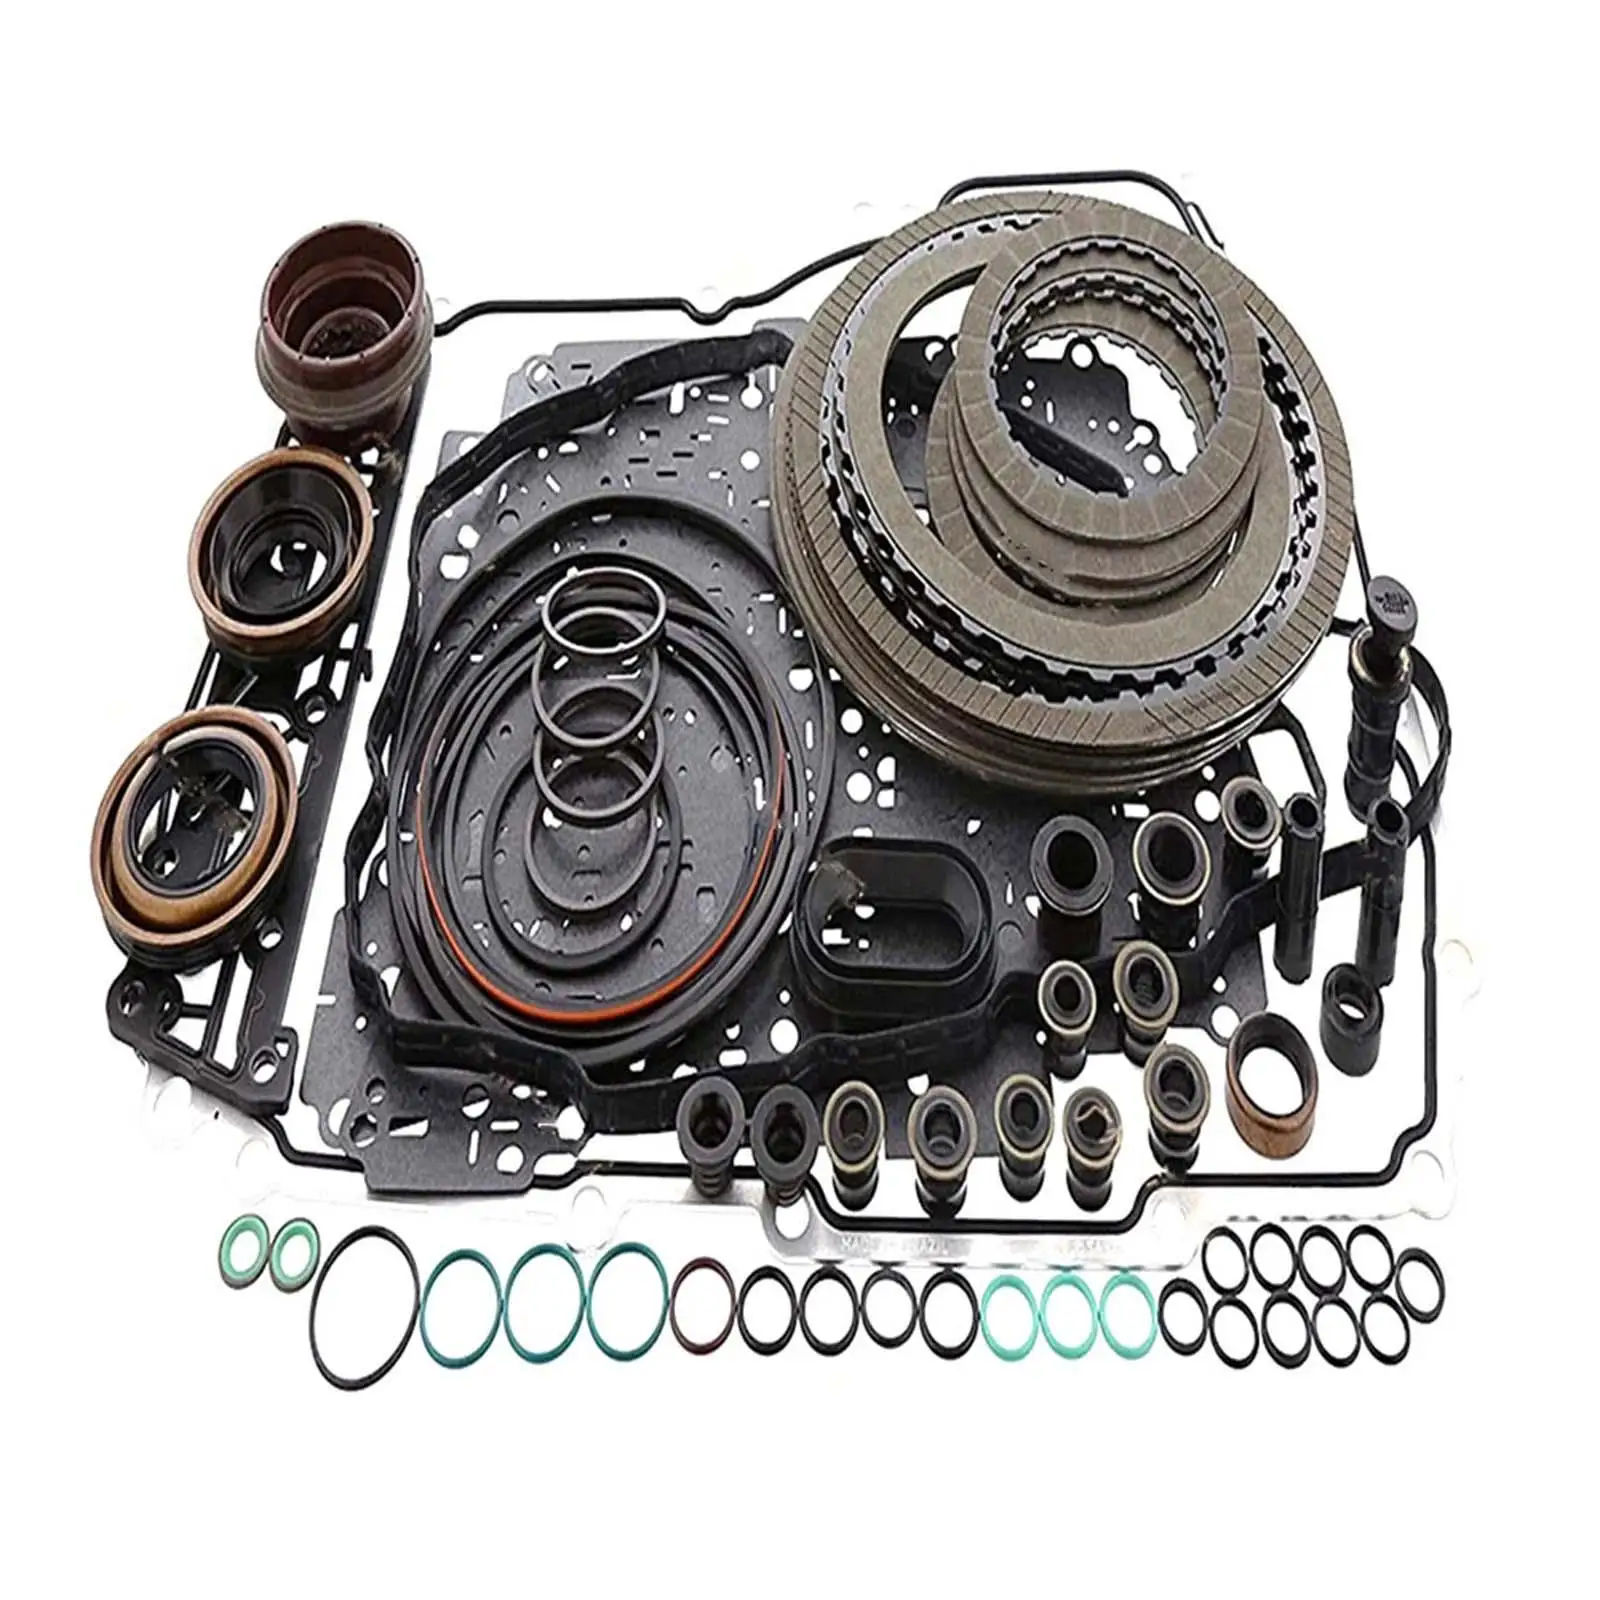 6T40E 6T45E Automatic Transmission Master Overhaul Rebuild Set B204881A Wear Resistance Gaskets Seals O Rings for Chevrolet